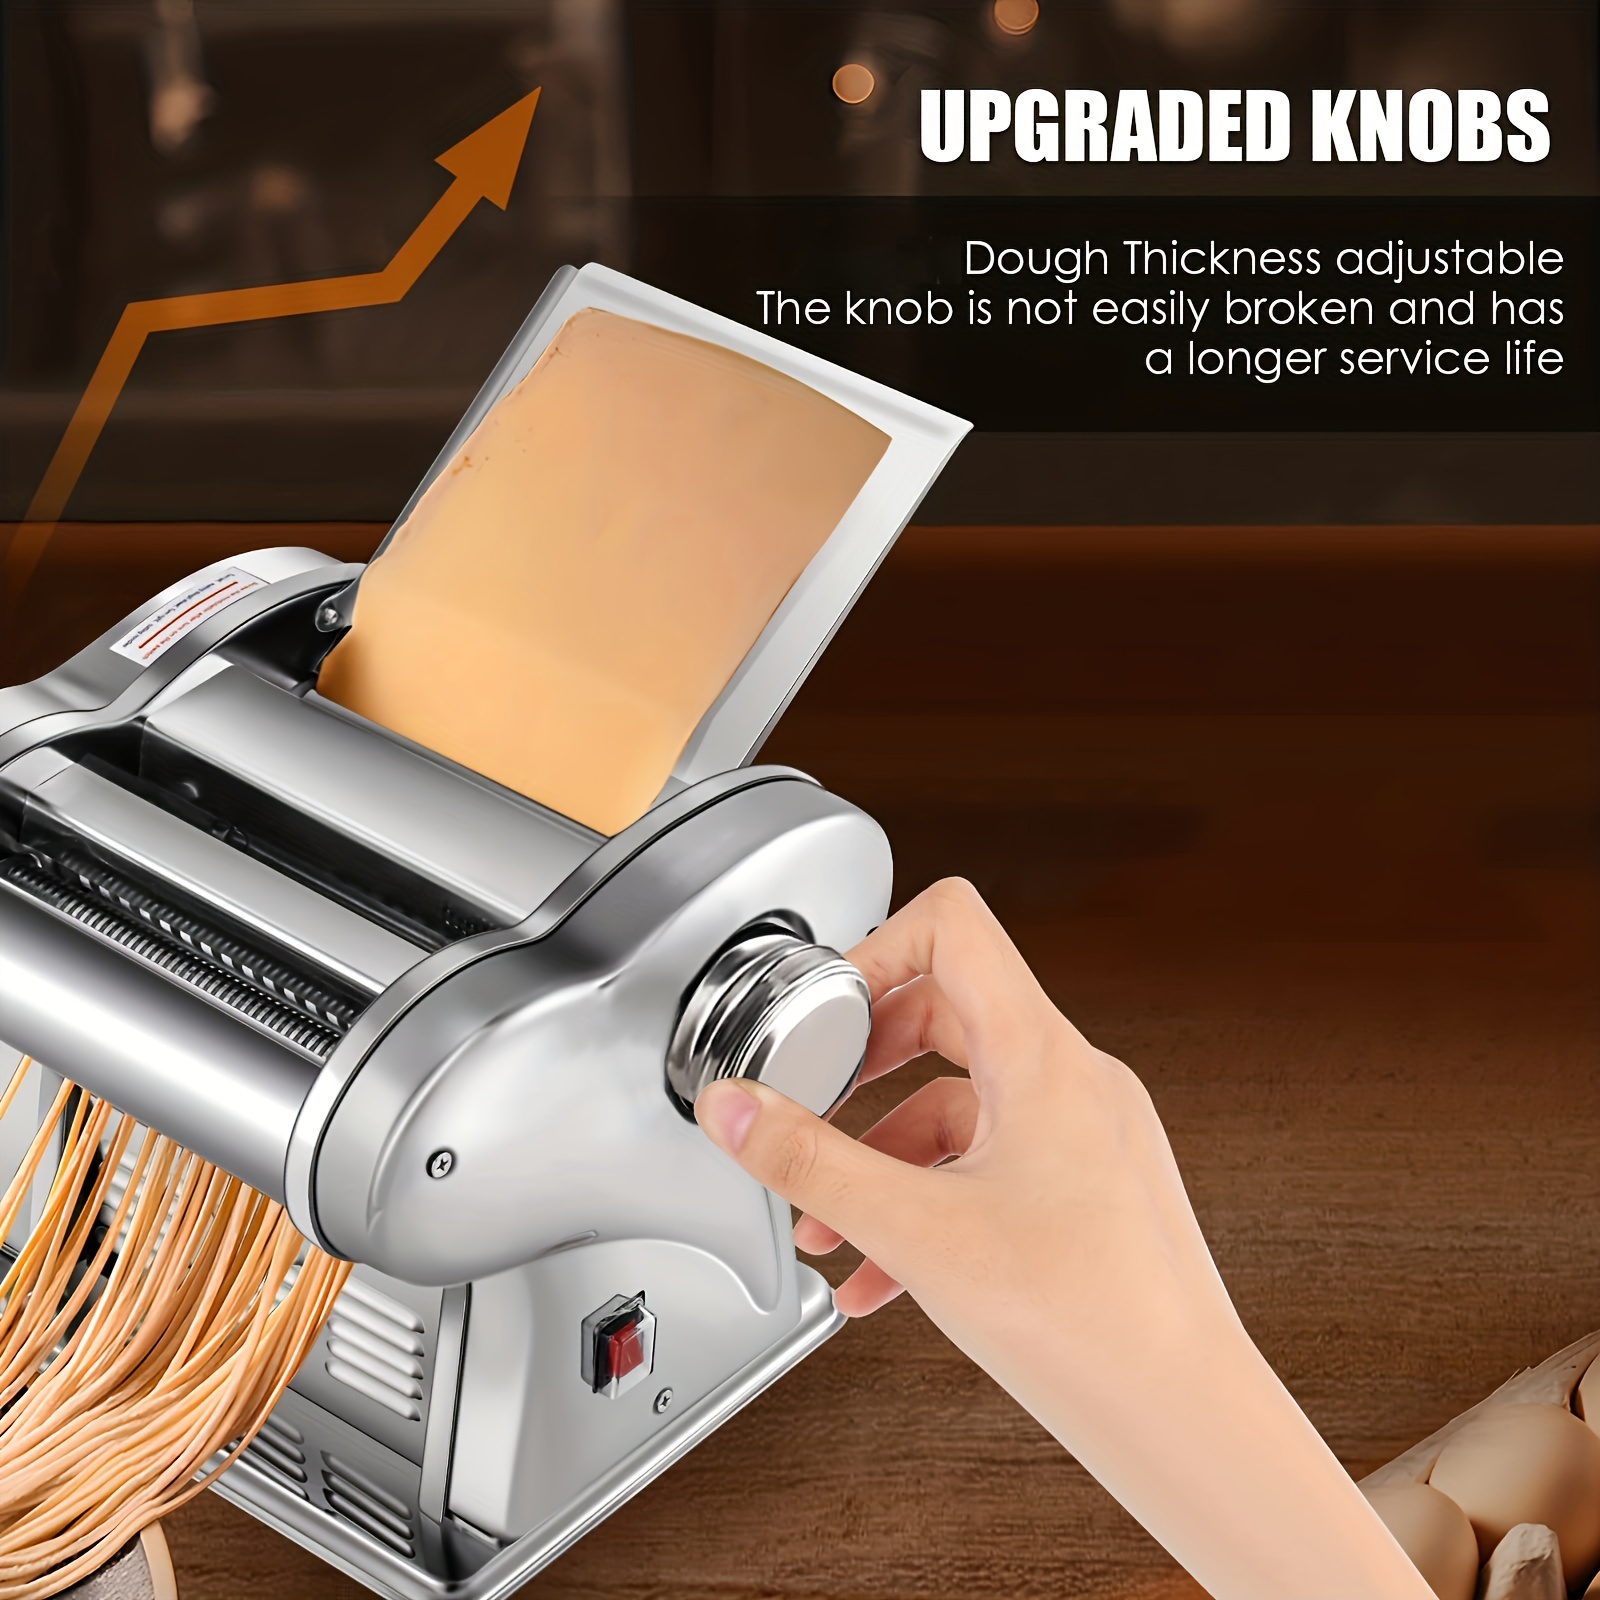 Home Kitchen Stainless Steel Pasta Maker Noodle Making Dough